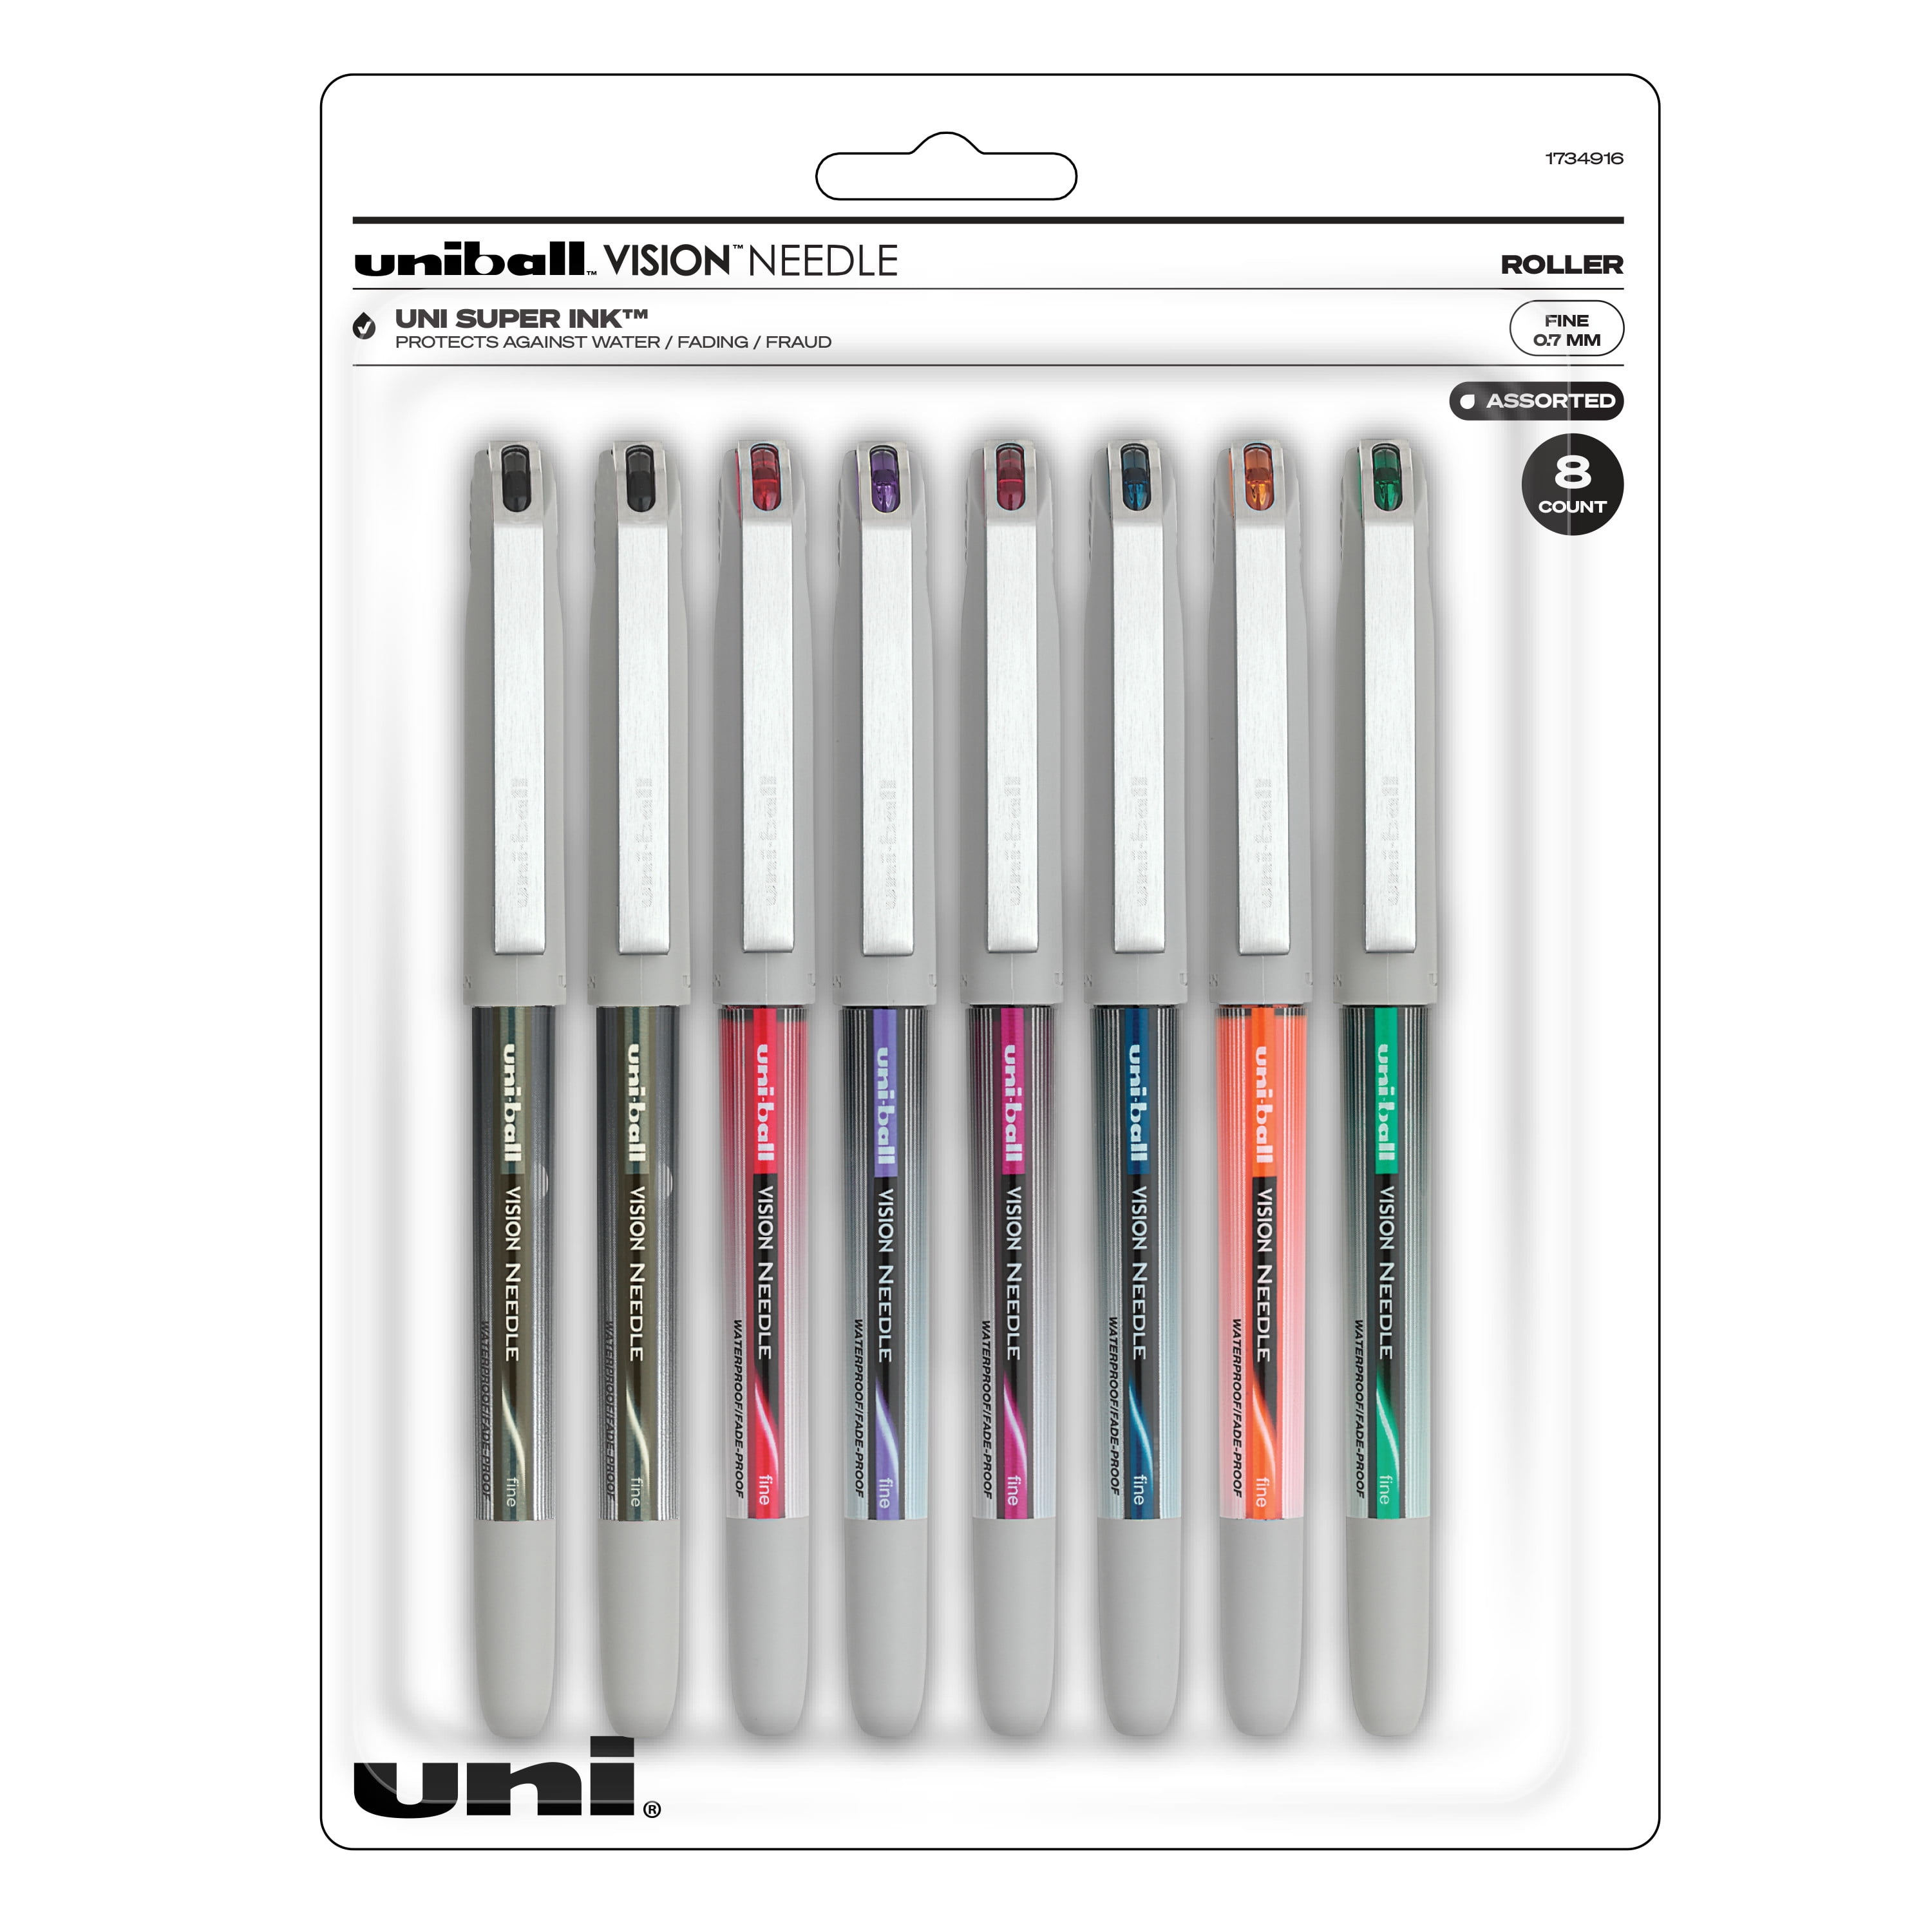 Uniball Vision Needle Rollerball Pens, Fine Point (0.7mm